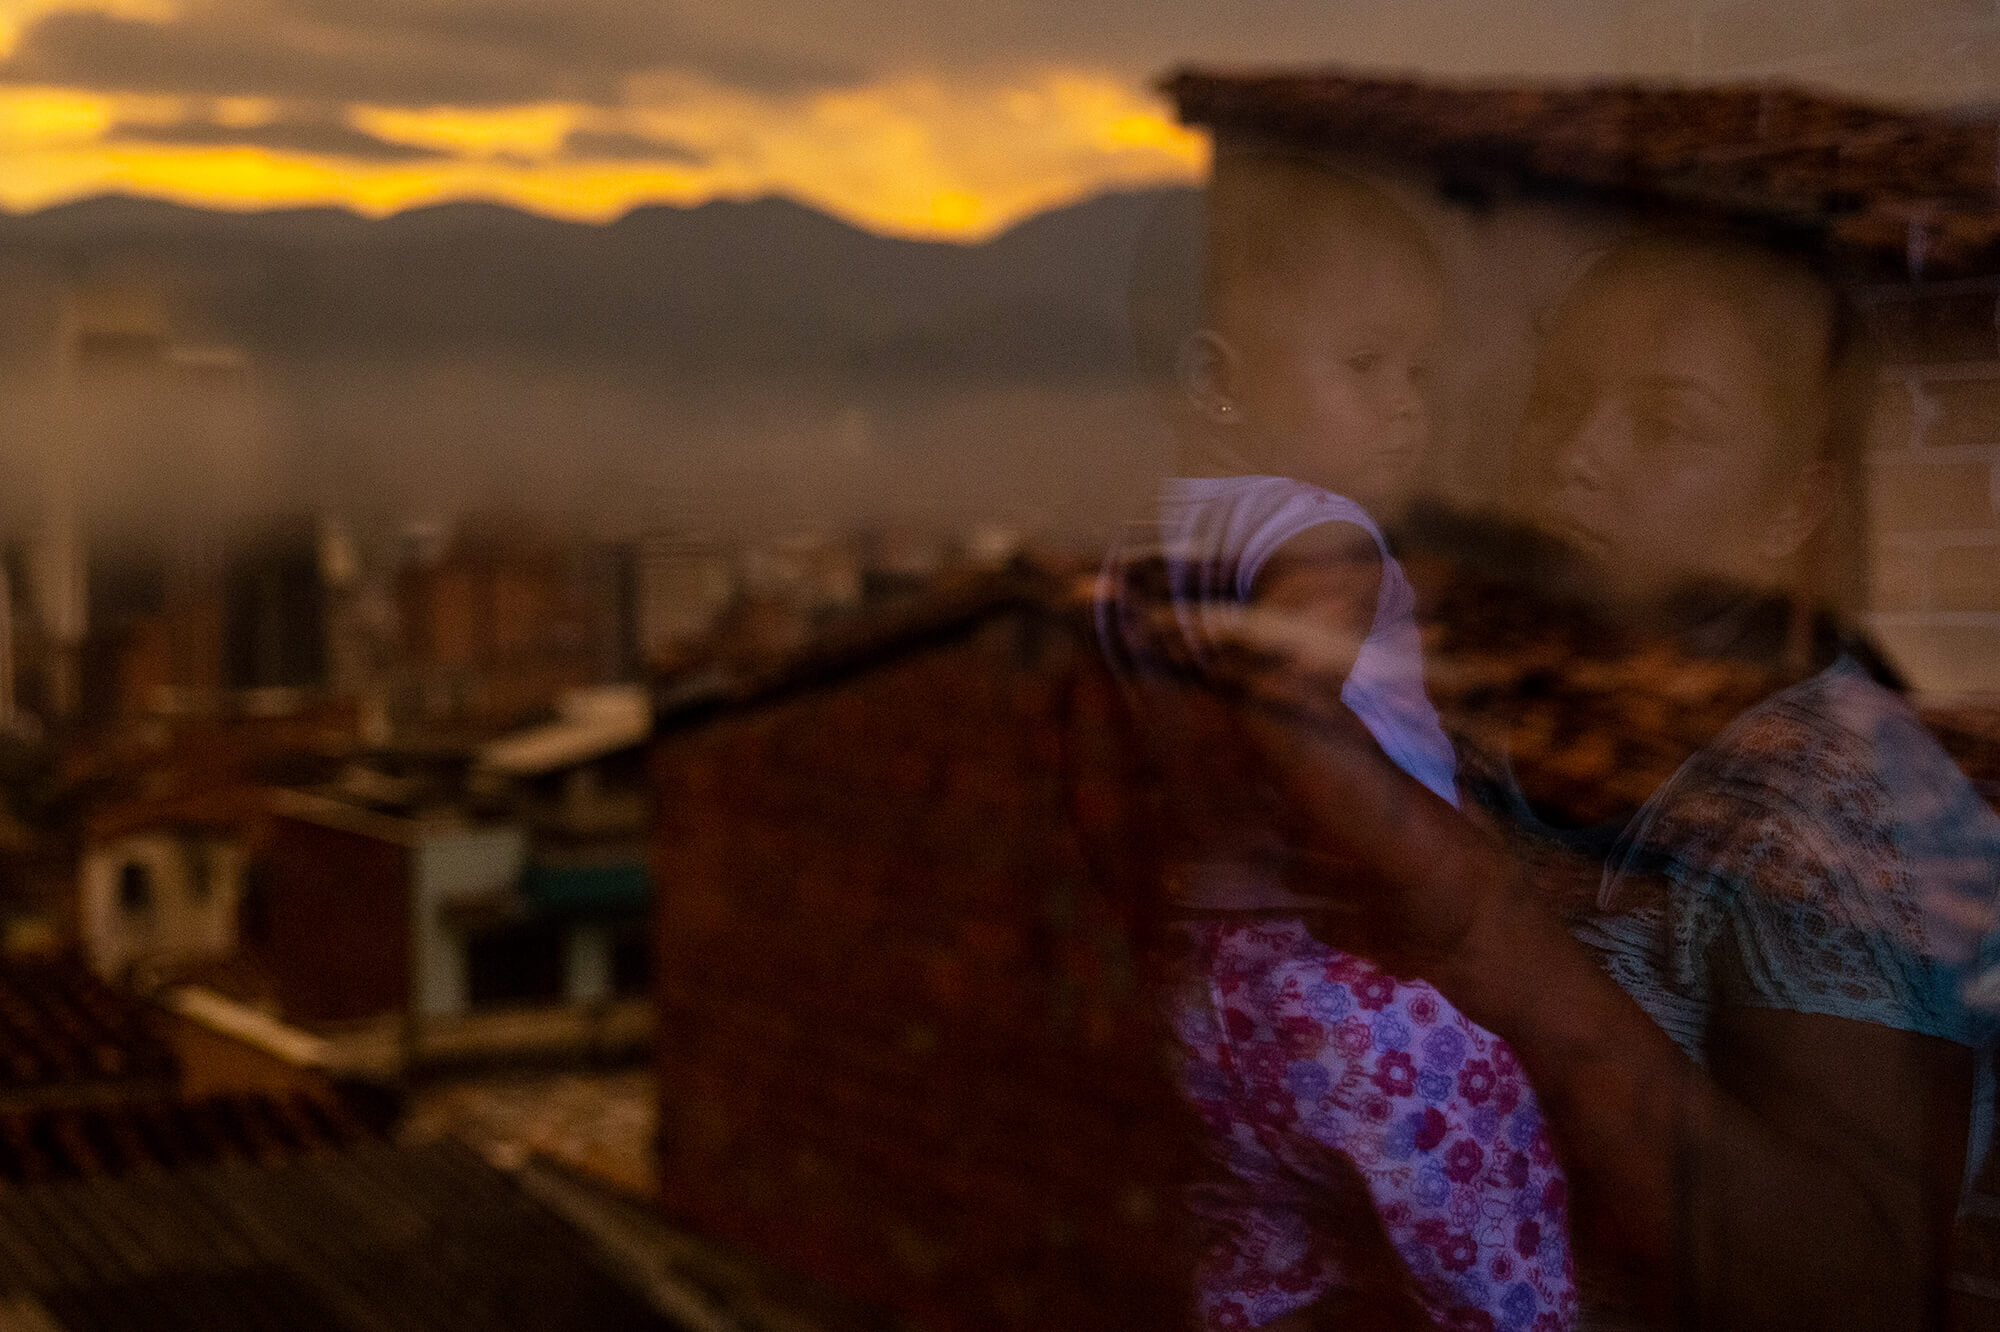 A mother holding her baby is reflected in a window overlooking a city skyline